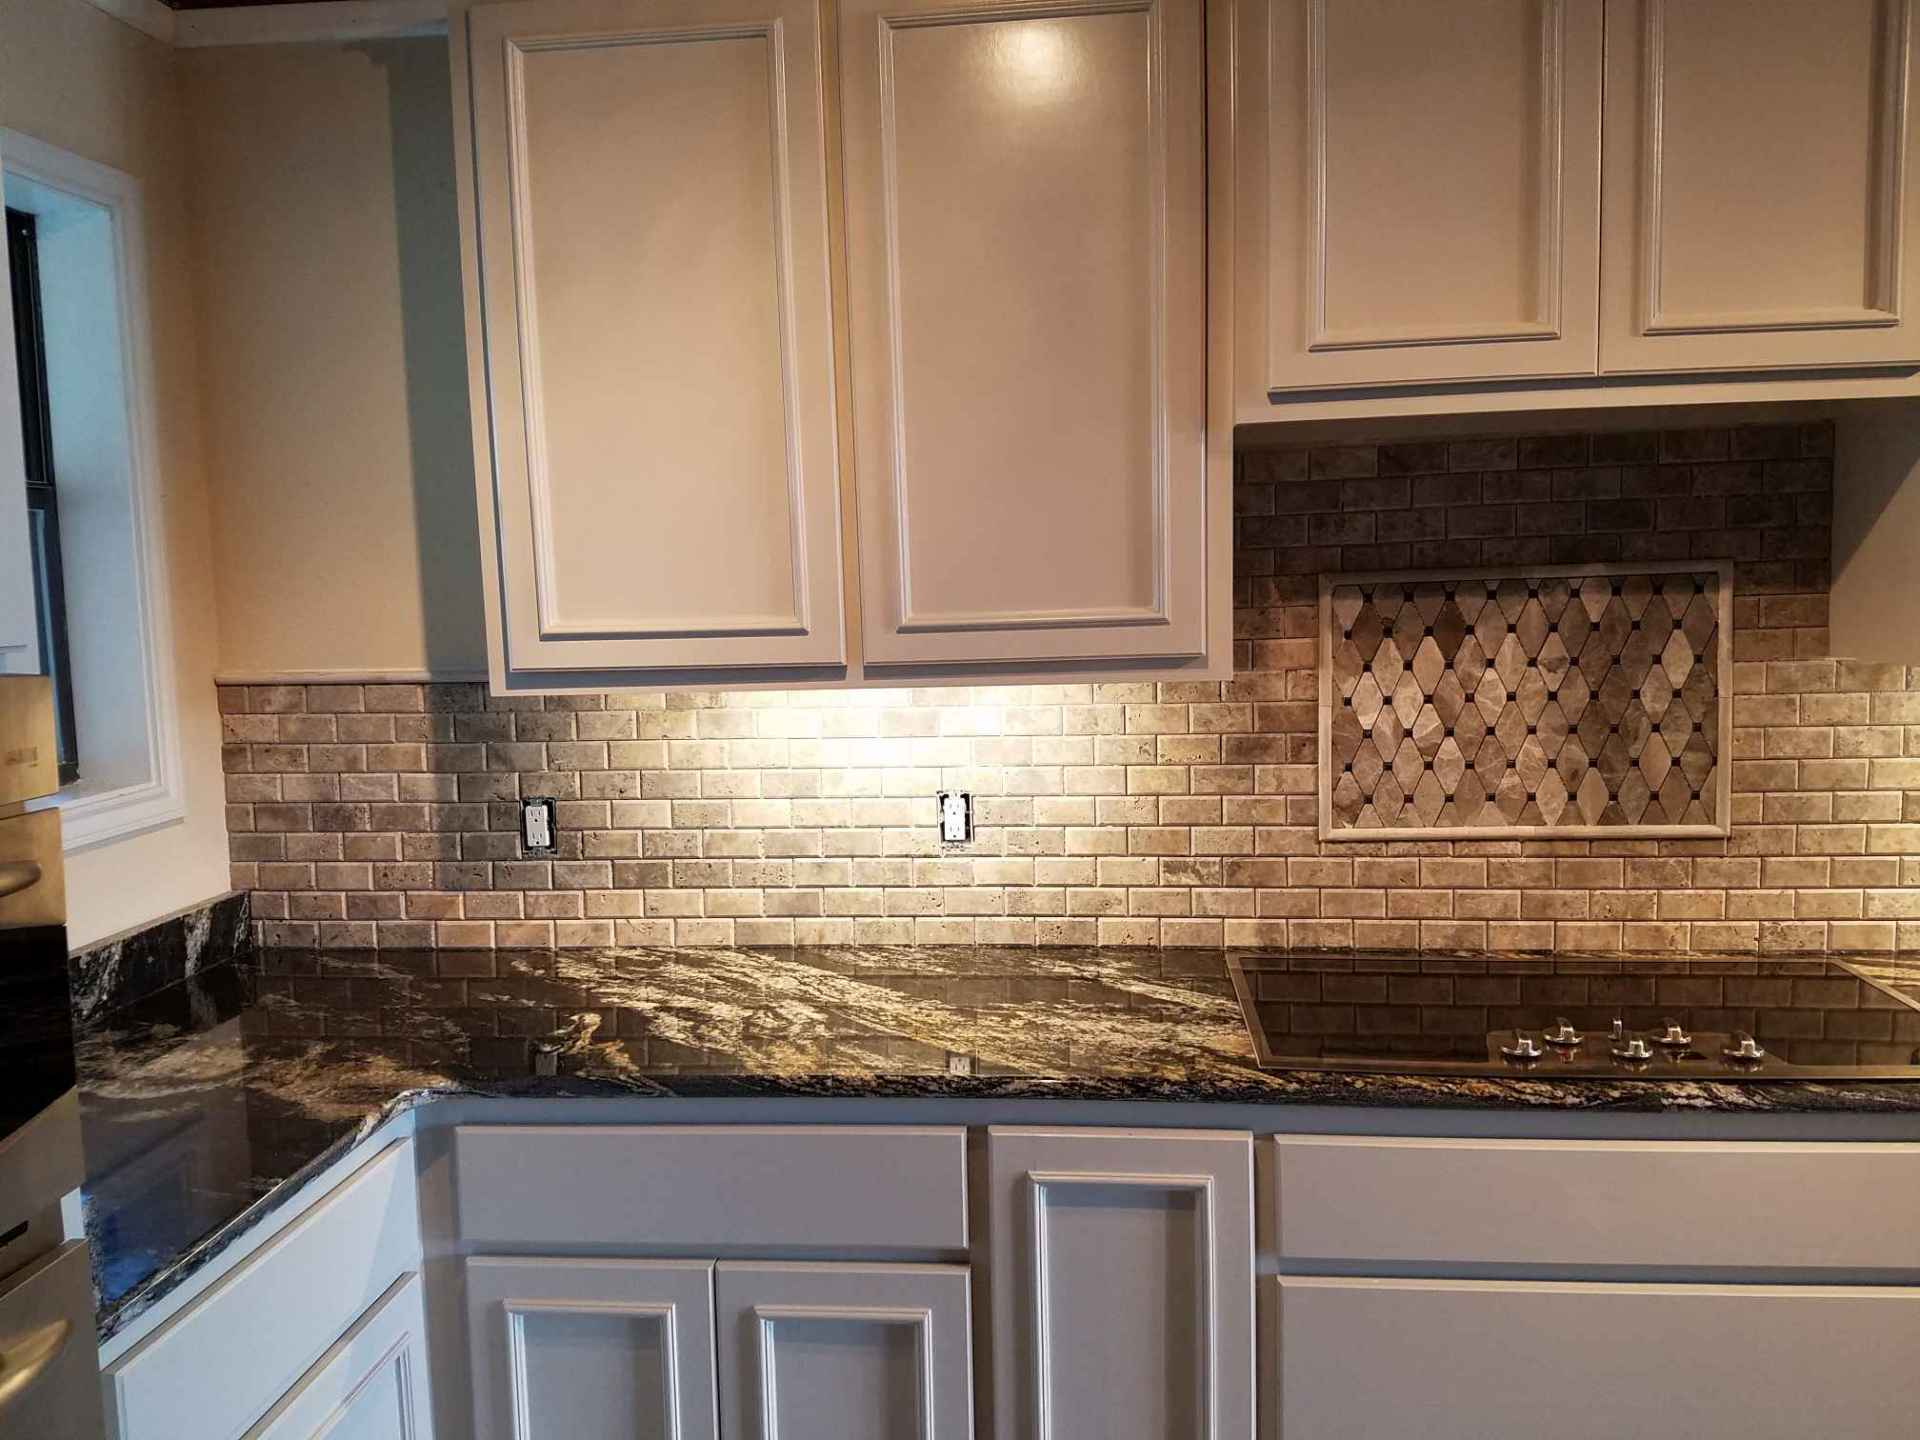 Precise Remodeling - San Angelo, TX - Gallery of Our Work